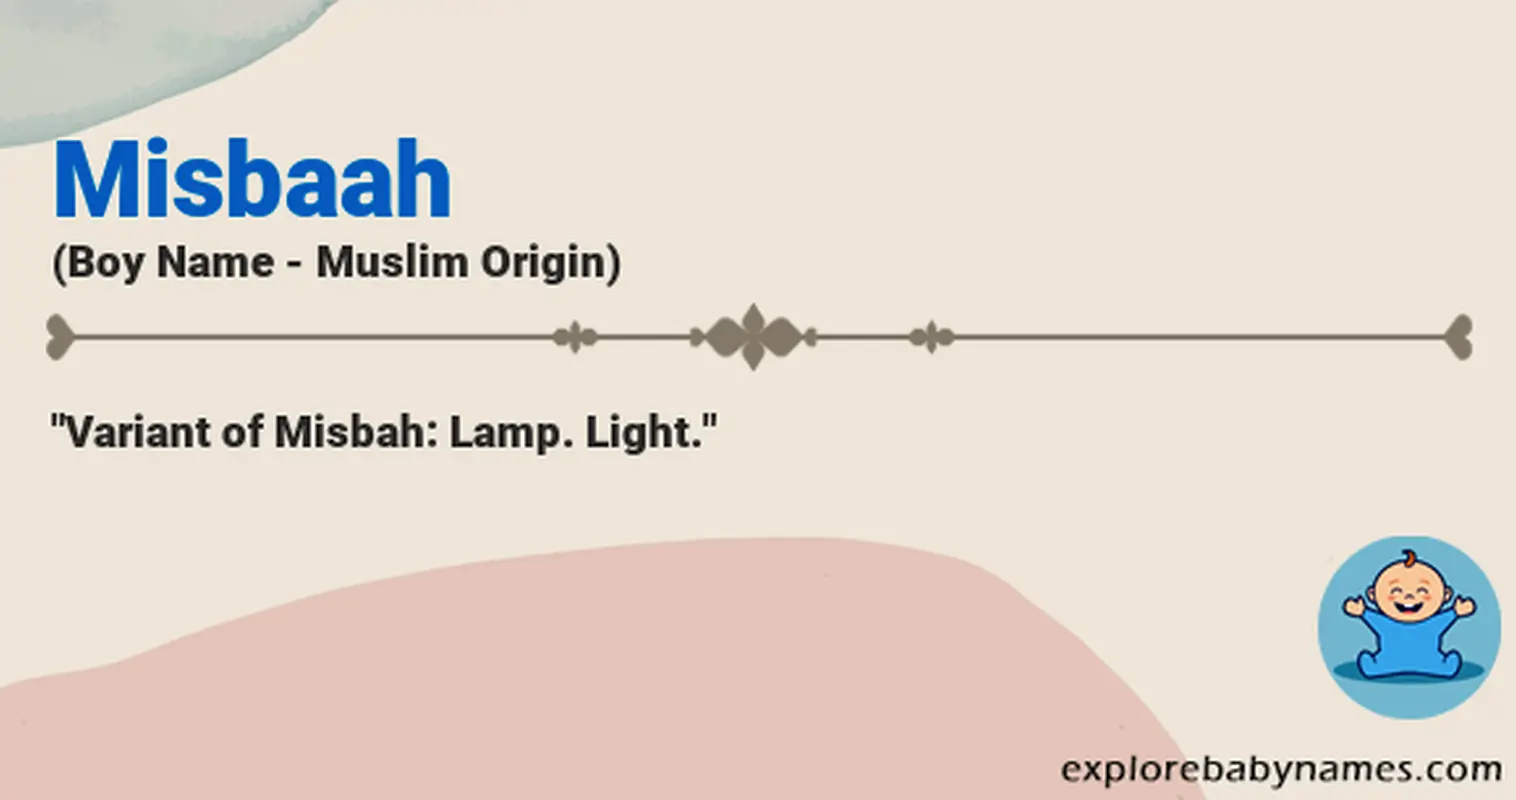 Meaning of Misbaah